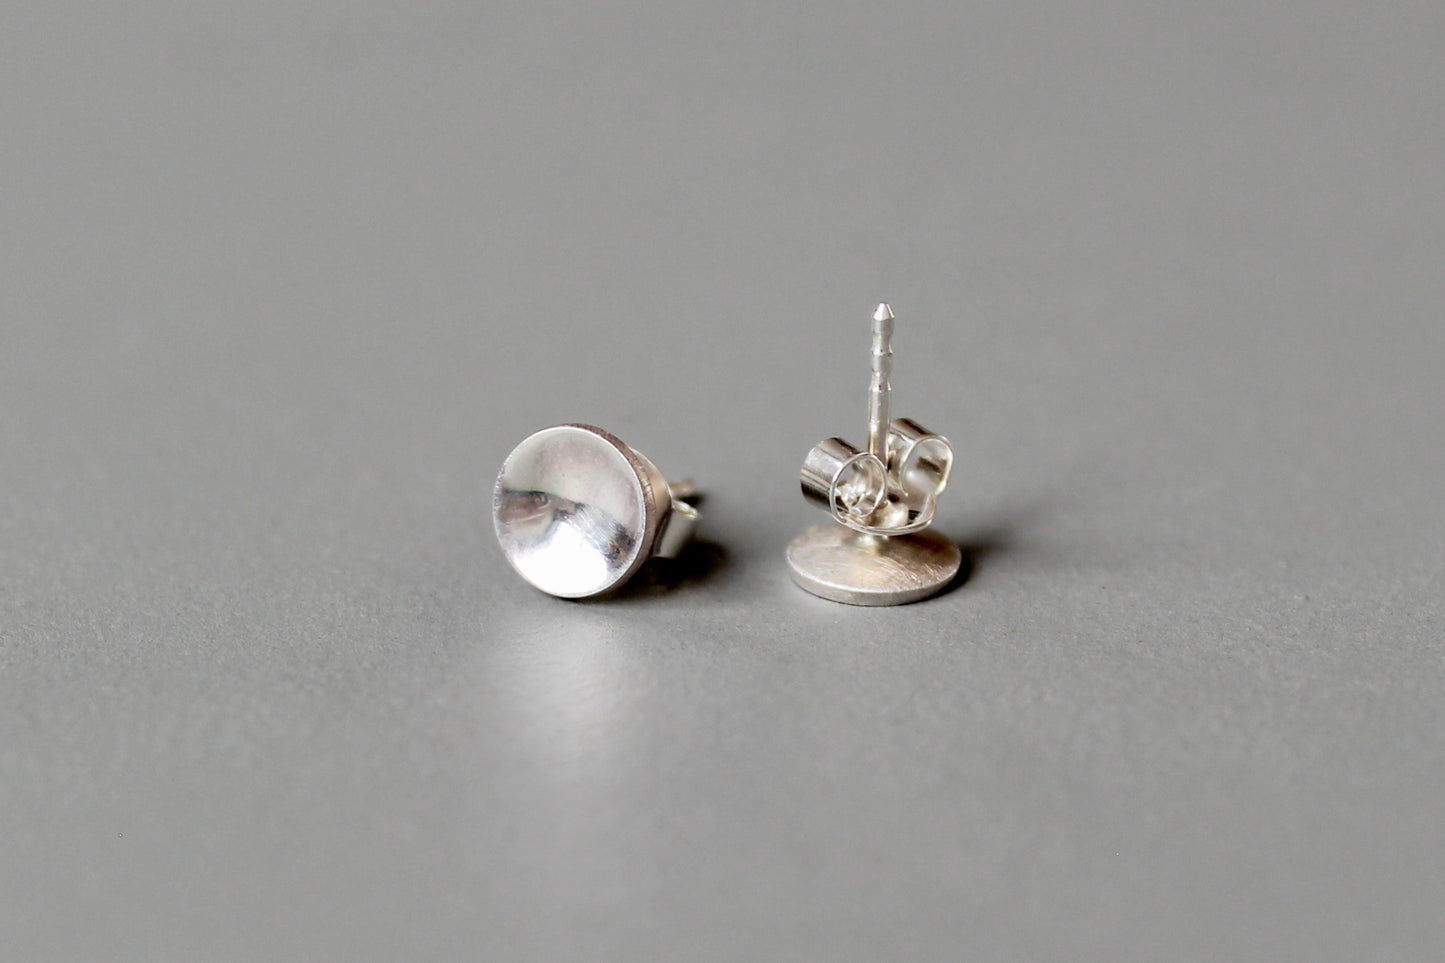 round elegant ear studs in polished sterling silver